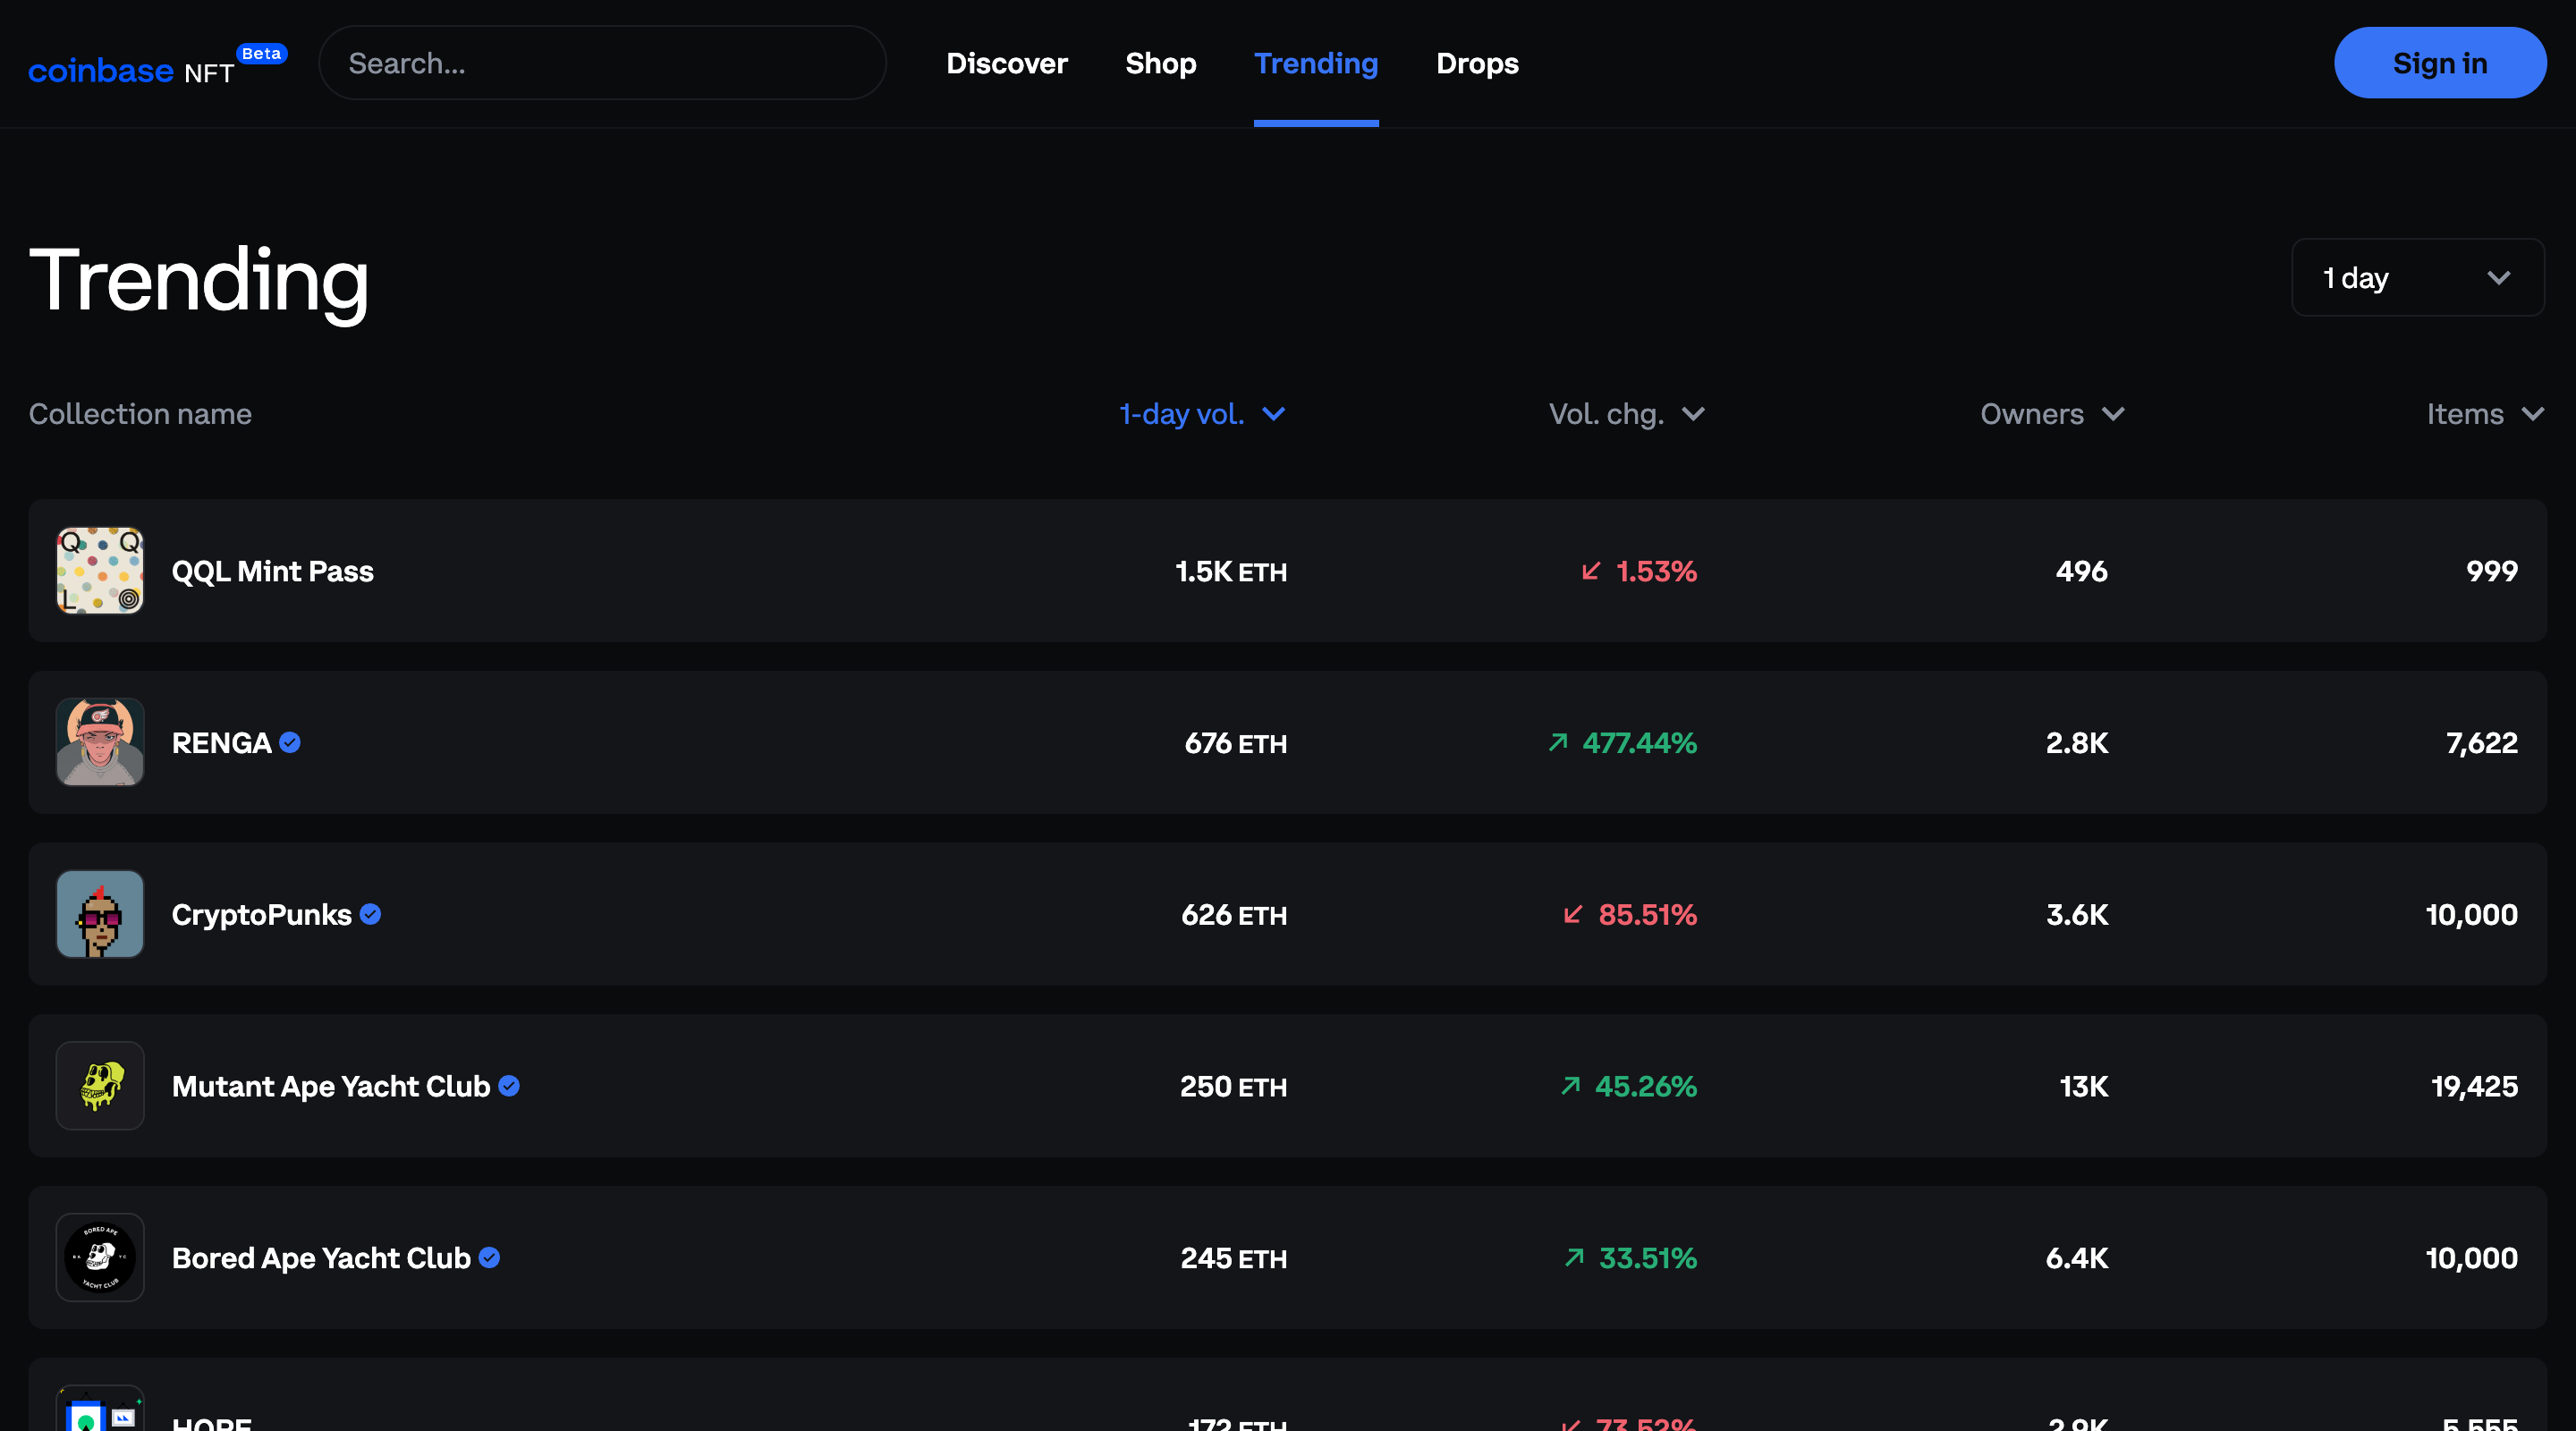 Screenshot of the Coinbase NFT 'Trending' page. The header contains the Coinbase logo, a search bar, main site navigation, and a 'Sign in' button. Below is a table where each row is a trending collection. Each table row contains statistics such as number of owners and number of items, and a small image representing the collection.